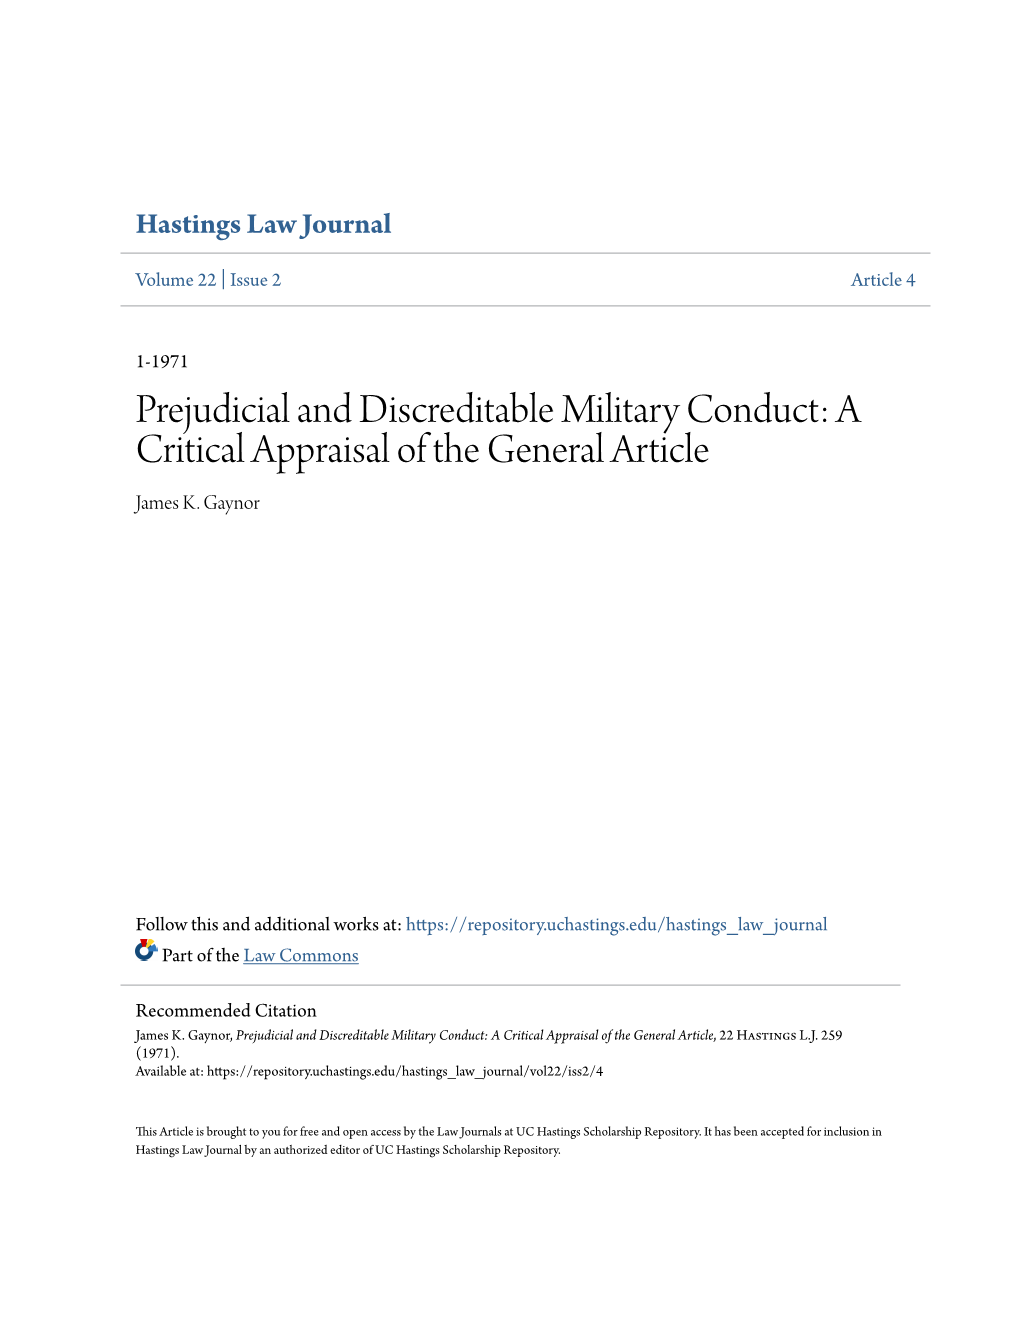 Prejudicial and Discreditable Military Conduct: a Critical Appraisal of the General Article James K